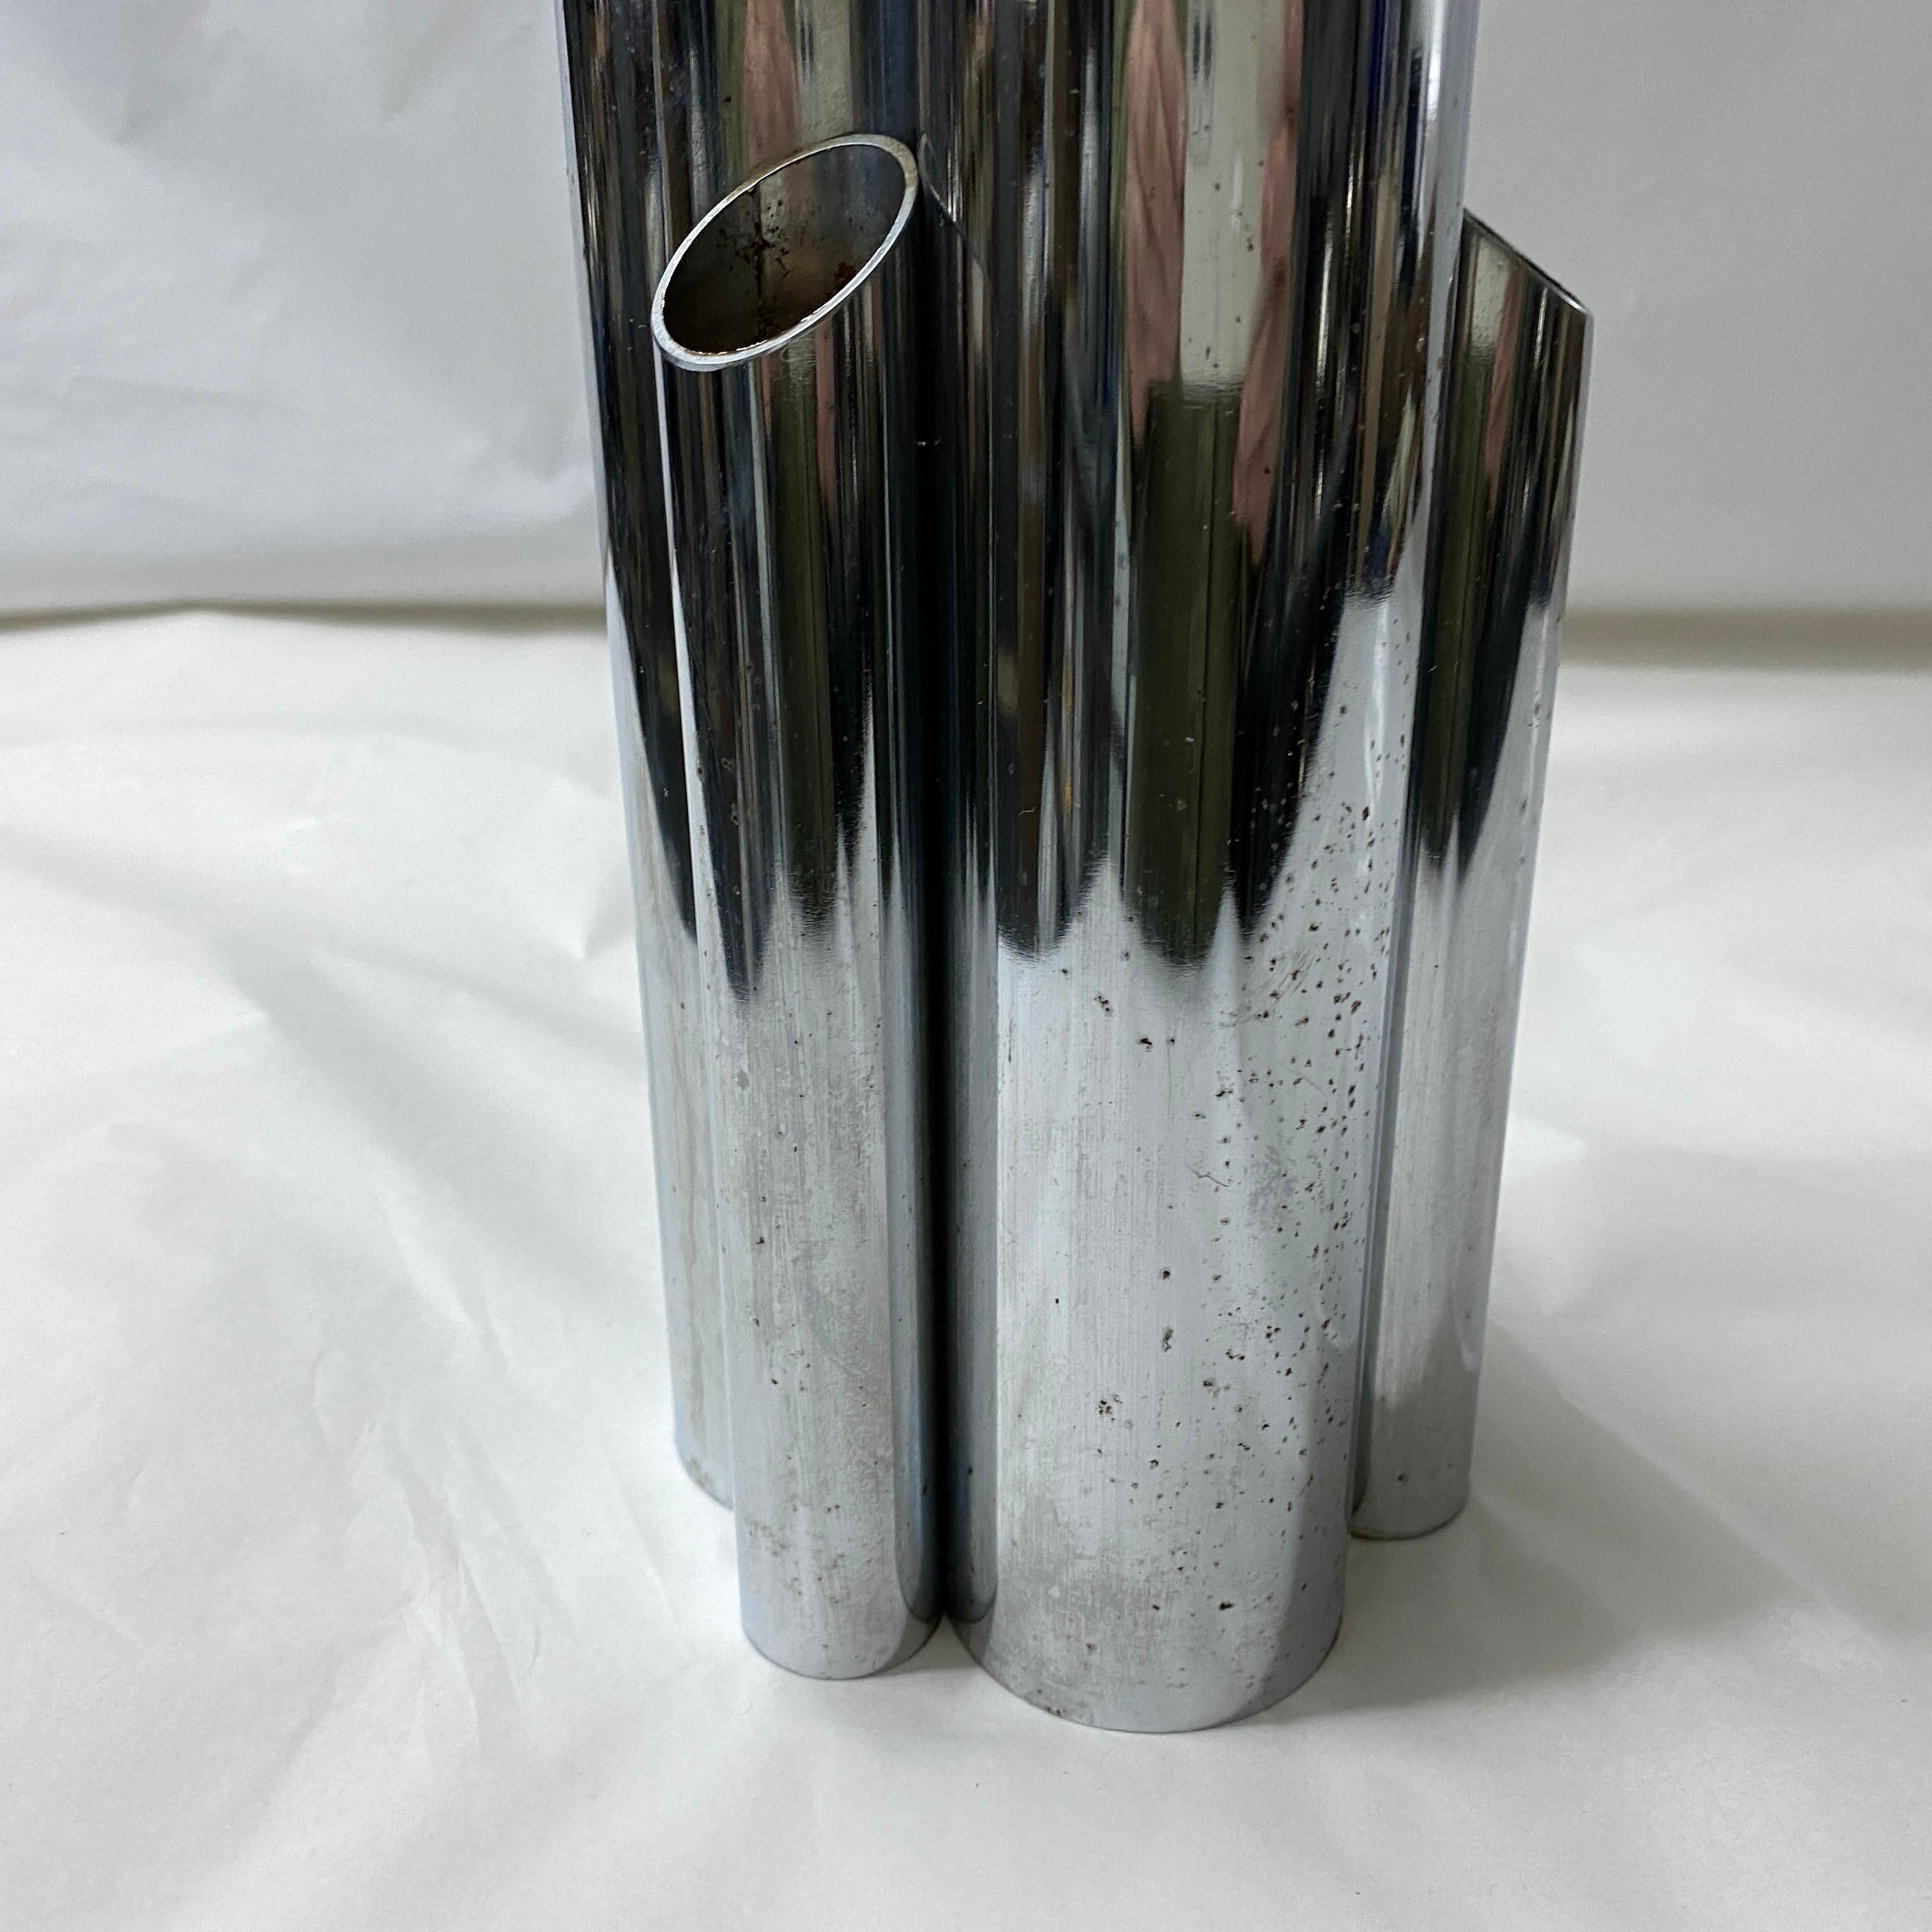 A silver plated multi pipes vase designed and manufactured in Italy in the Eighties, good conditions overall. The vase is a striking example of Italian design from that era. Inspired by the renowned architect and designer Giò Ponti, this vase